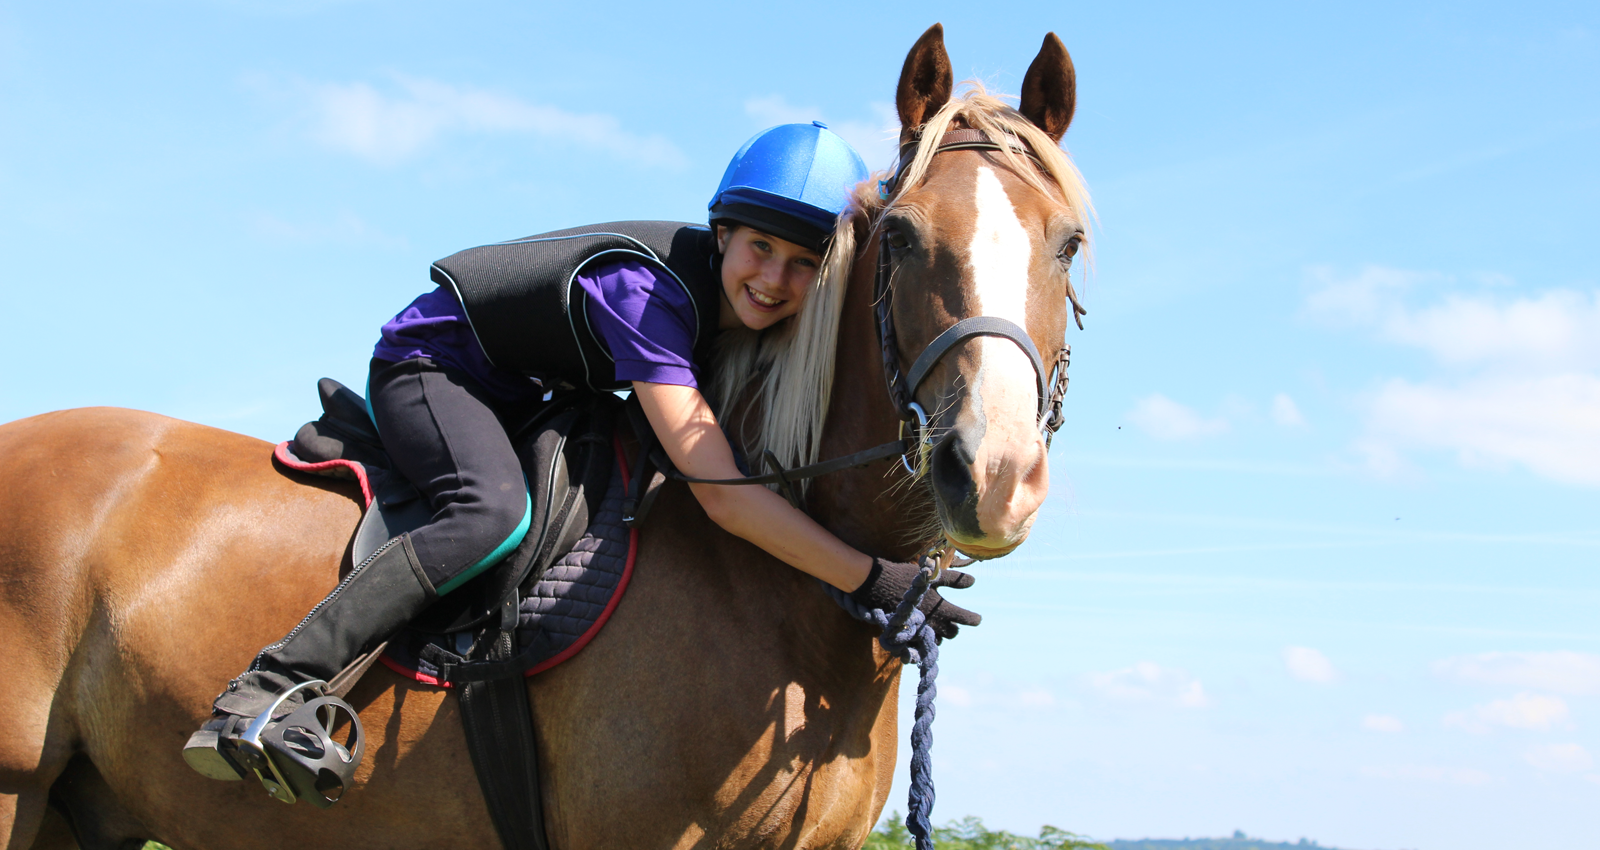 PGL Adventure Holidays - Specialist Holidays and Summer Camps for 7-17 year olds - Love to Learn - Climbing Adventure, Bushcraft, Cook's Academy, Surfing, Learner Driver, Wellbeing, Leadership Challenge, Pony Trekking & Riding